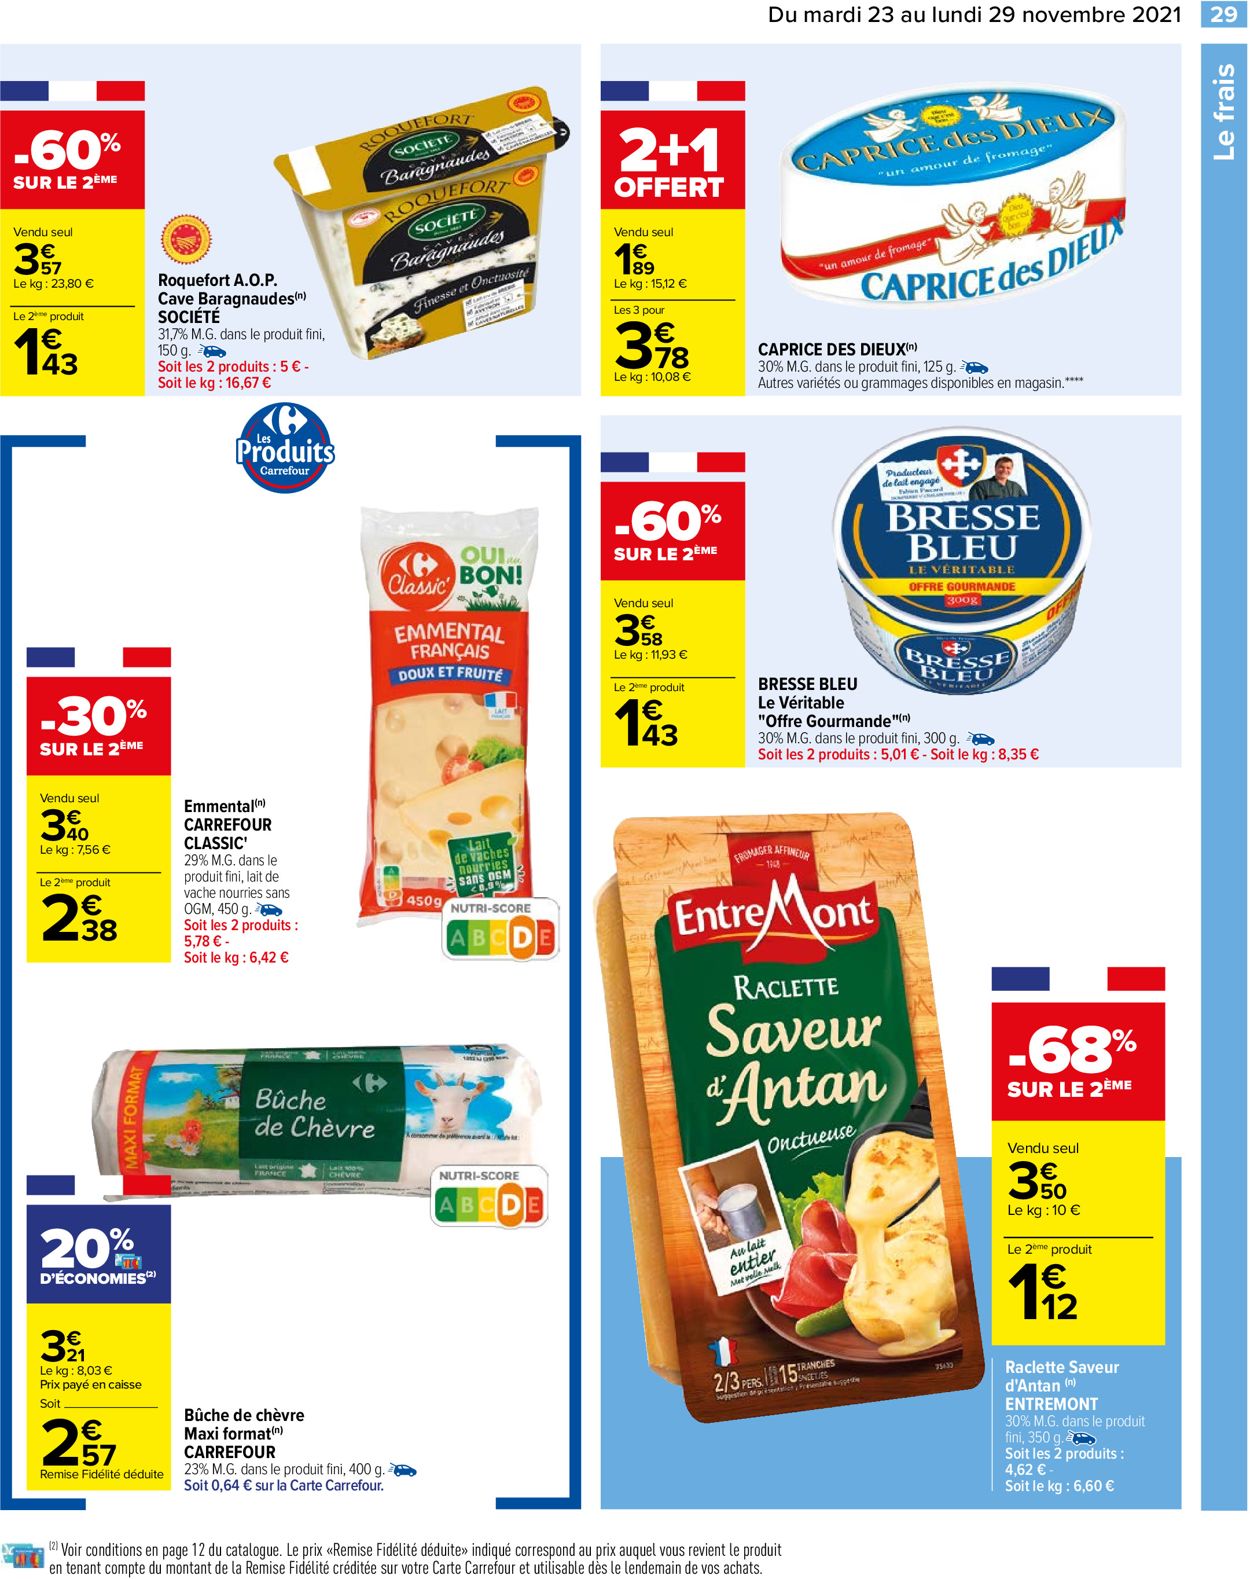 Carrefour BLACK WEEK 2021 Catalogue - 23.11-29.11.2021 (Page 29)